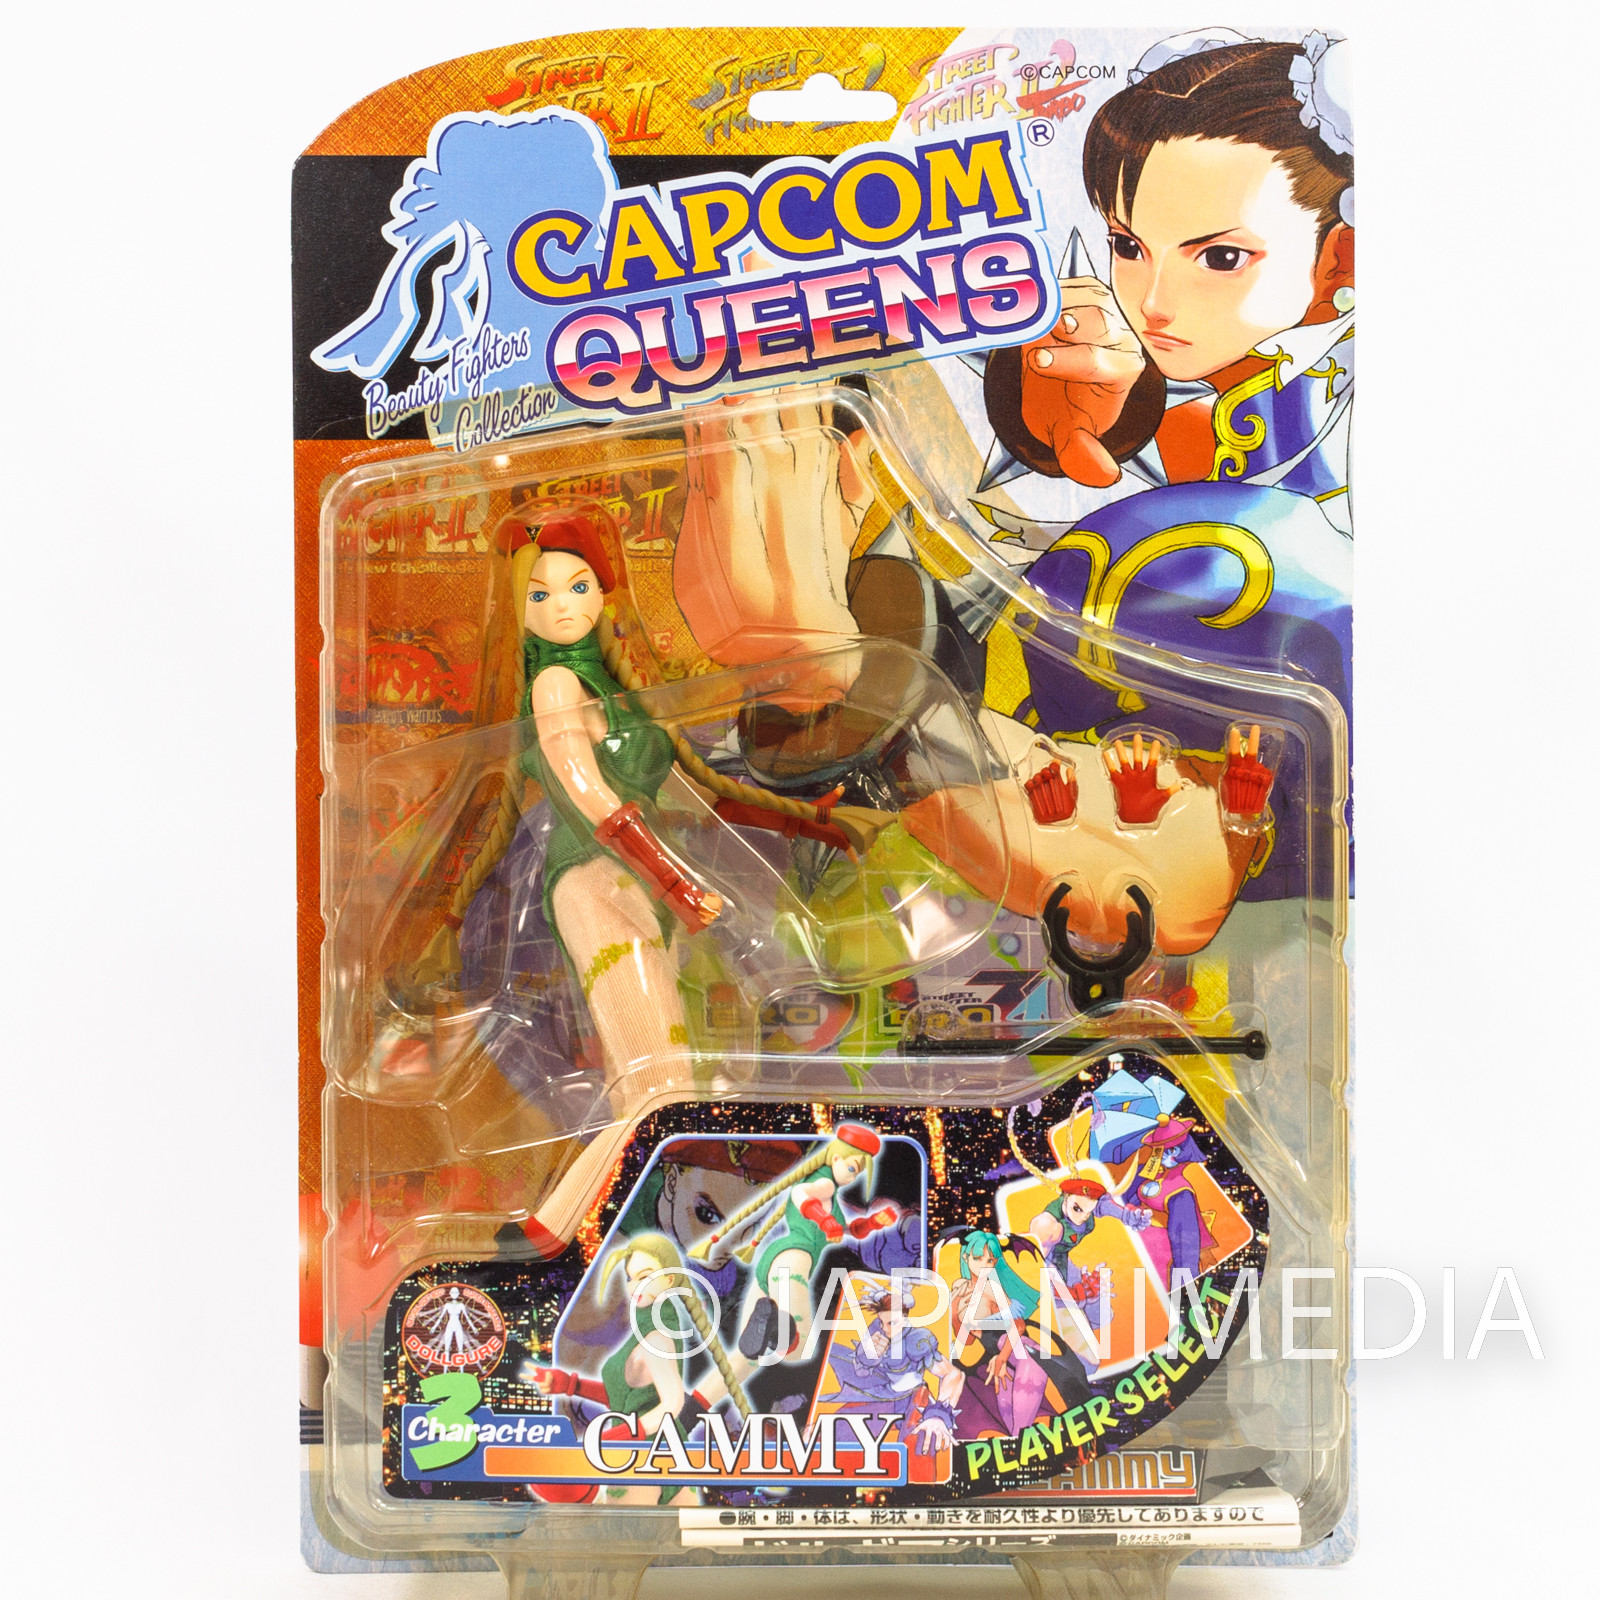 Street Fighter 2 Cammy Capcom Queen Figure Collection REDS MOBY DICK TOYS